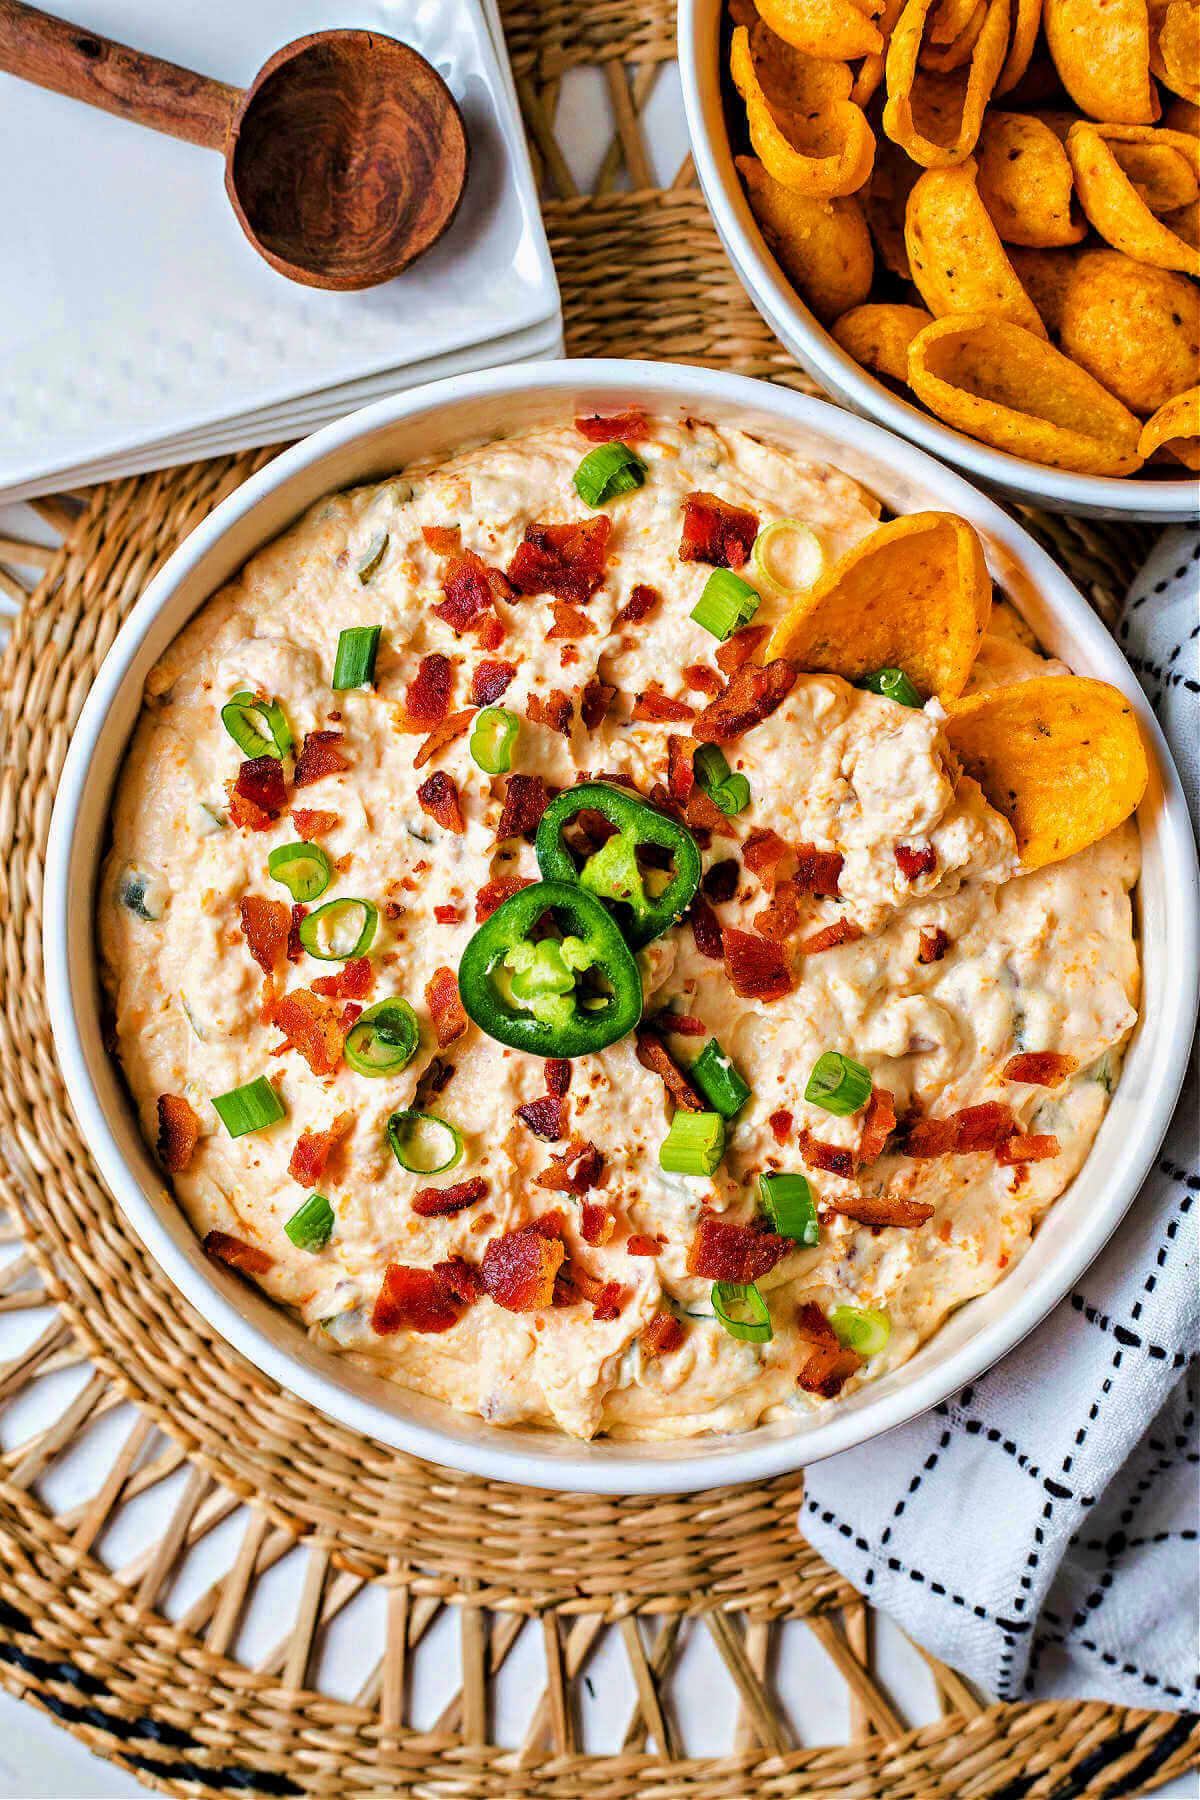 jalapeno popper cheese dip in a bowl garnished with bacon and green onions with a bowl of corn chips and a stack of snack plates in the background.